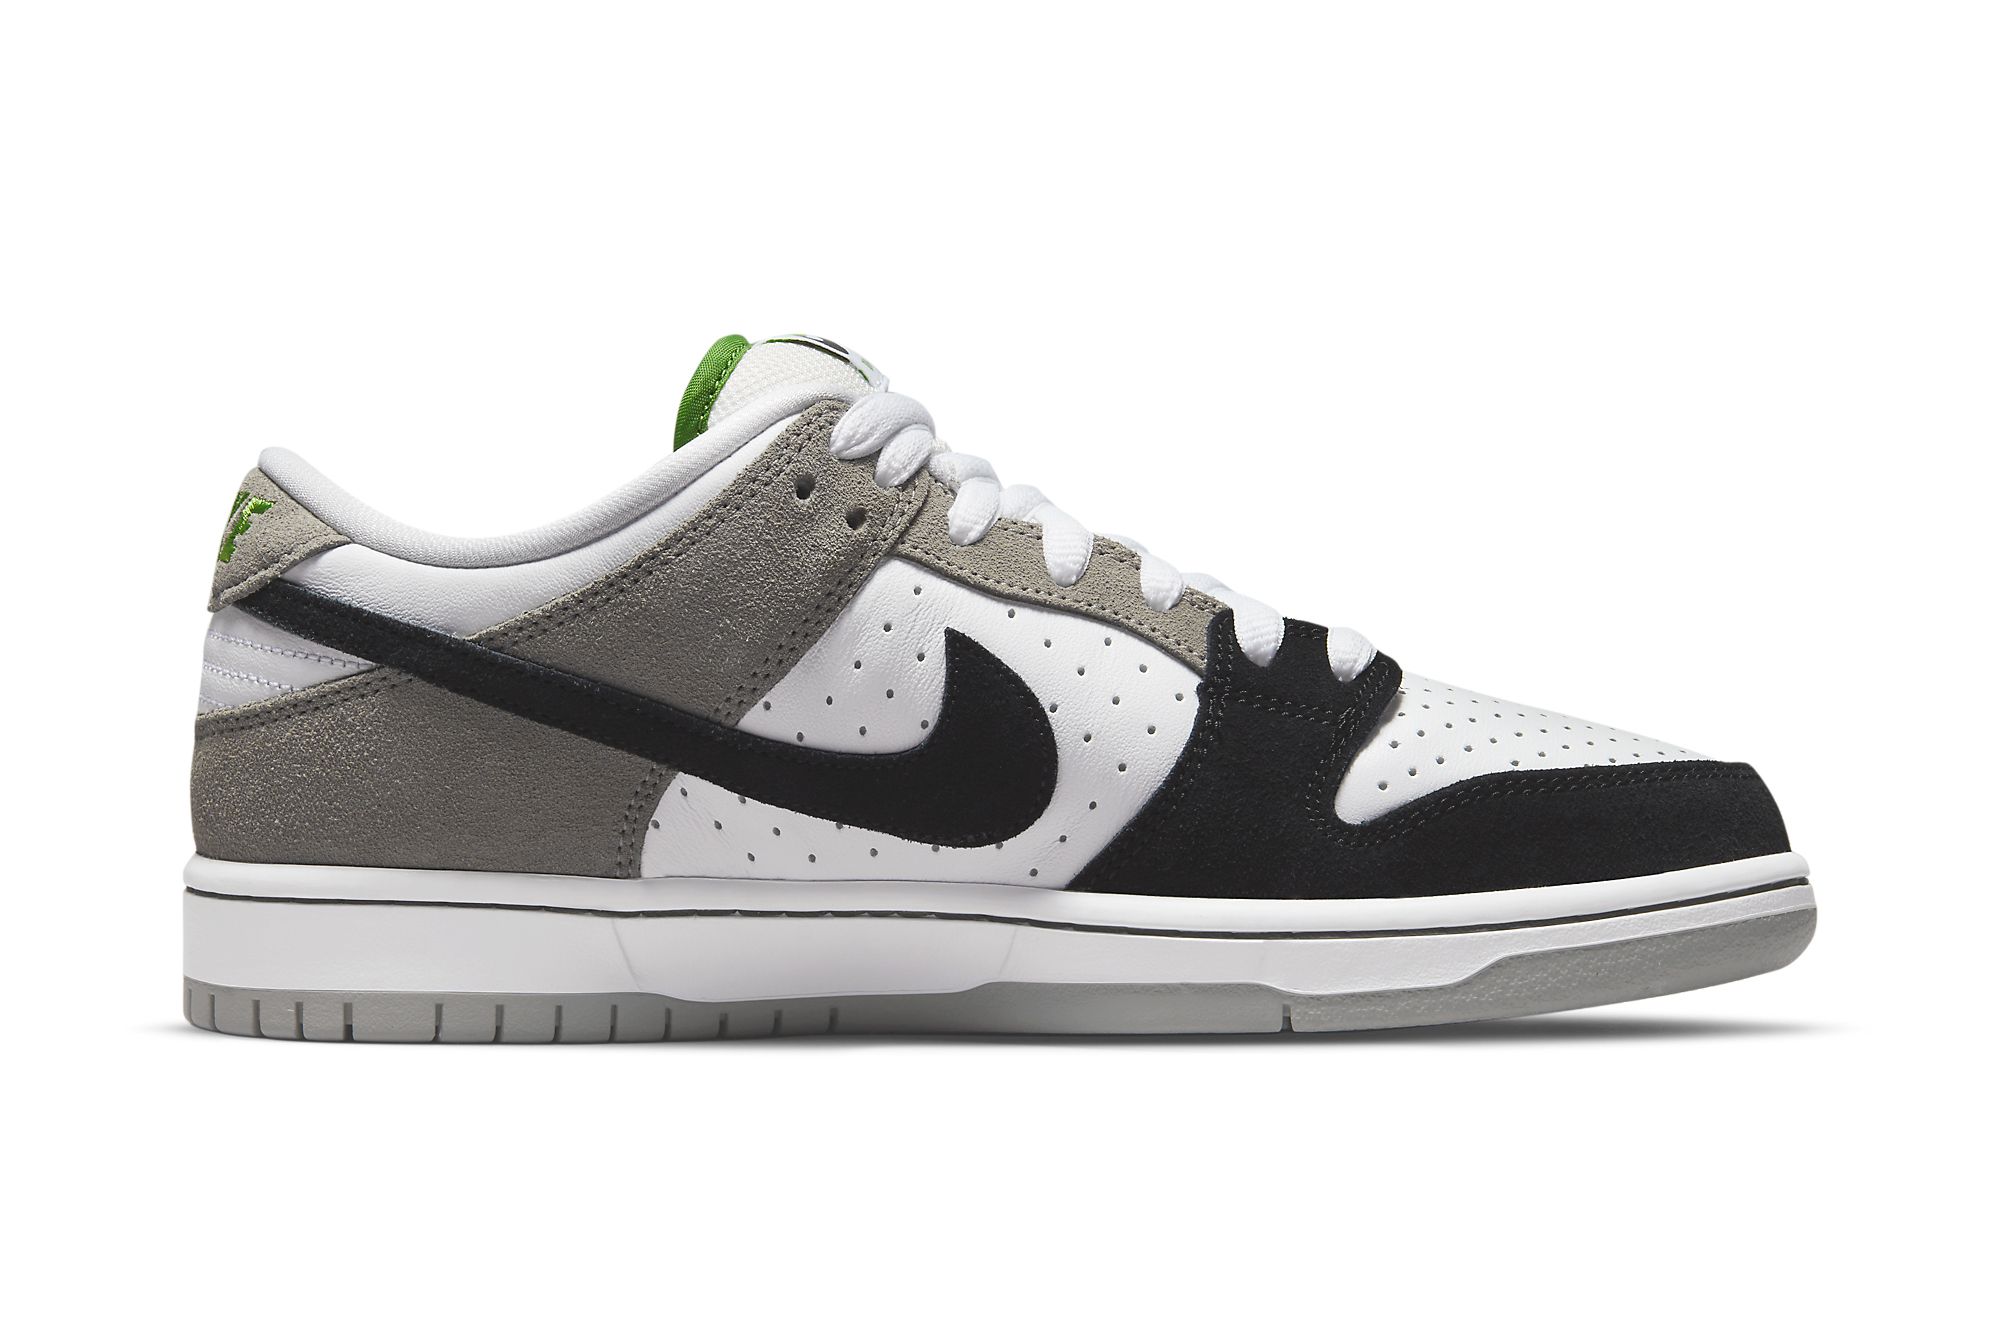 Nike SB Dunk Low 'Chlorophyll' Official Images